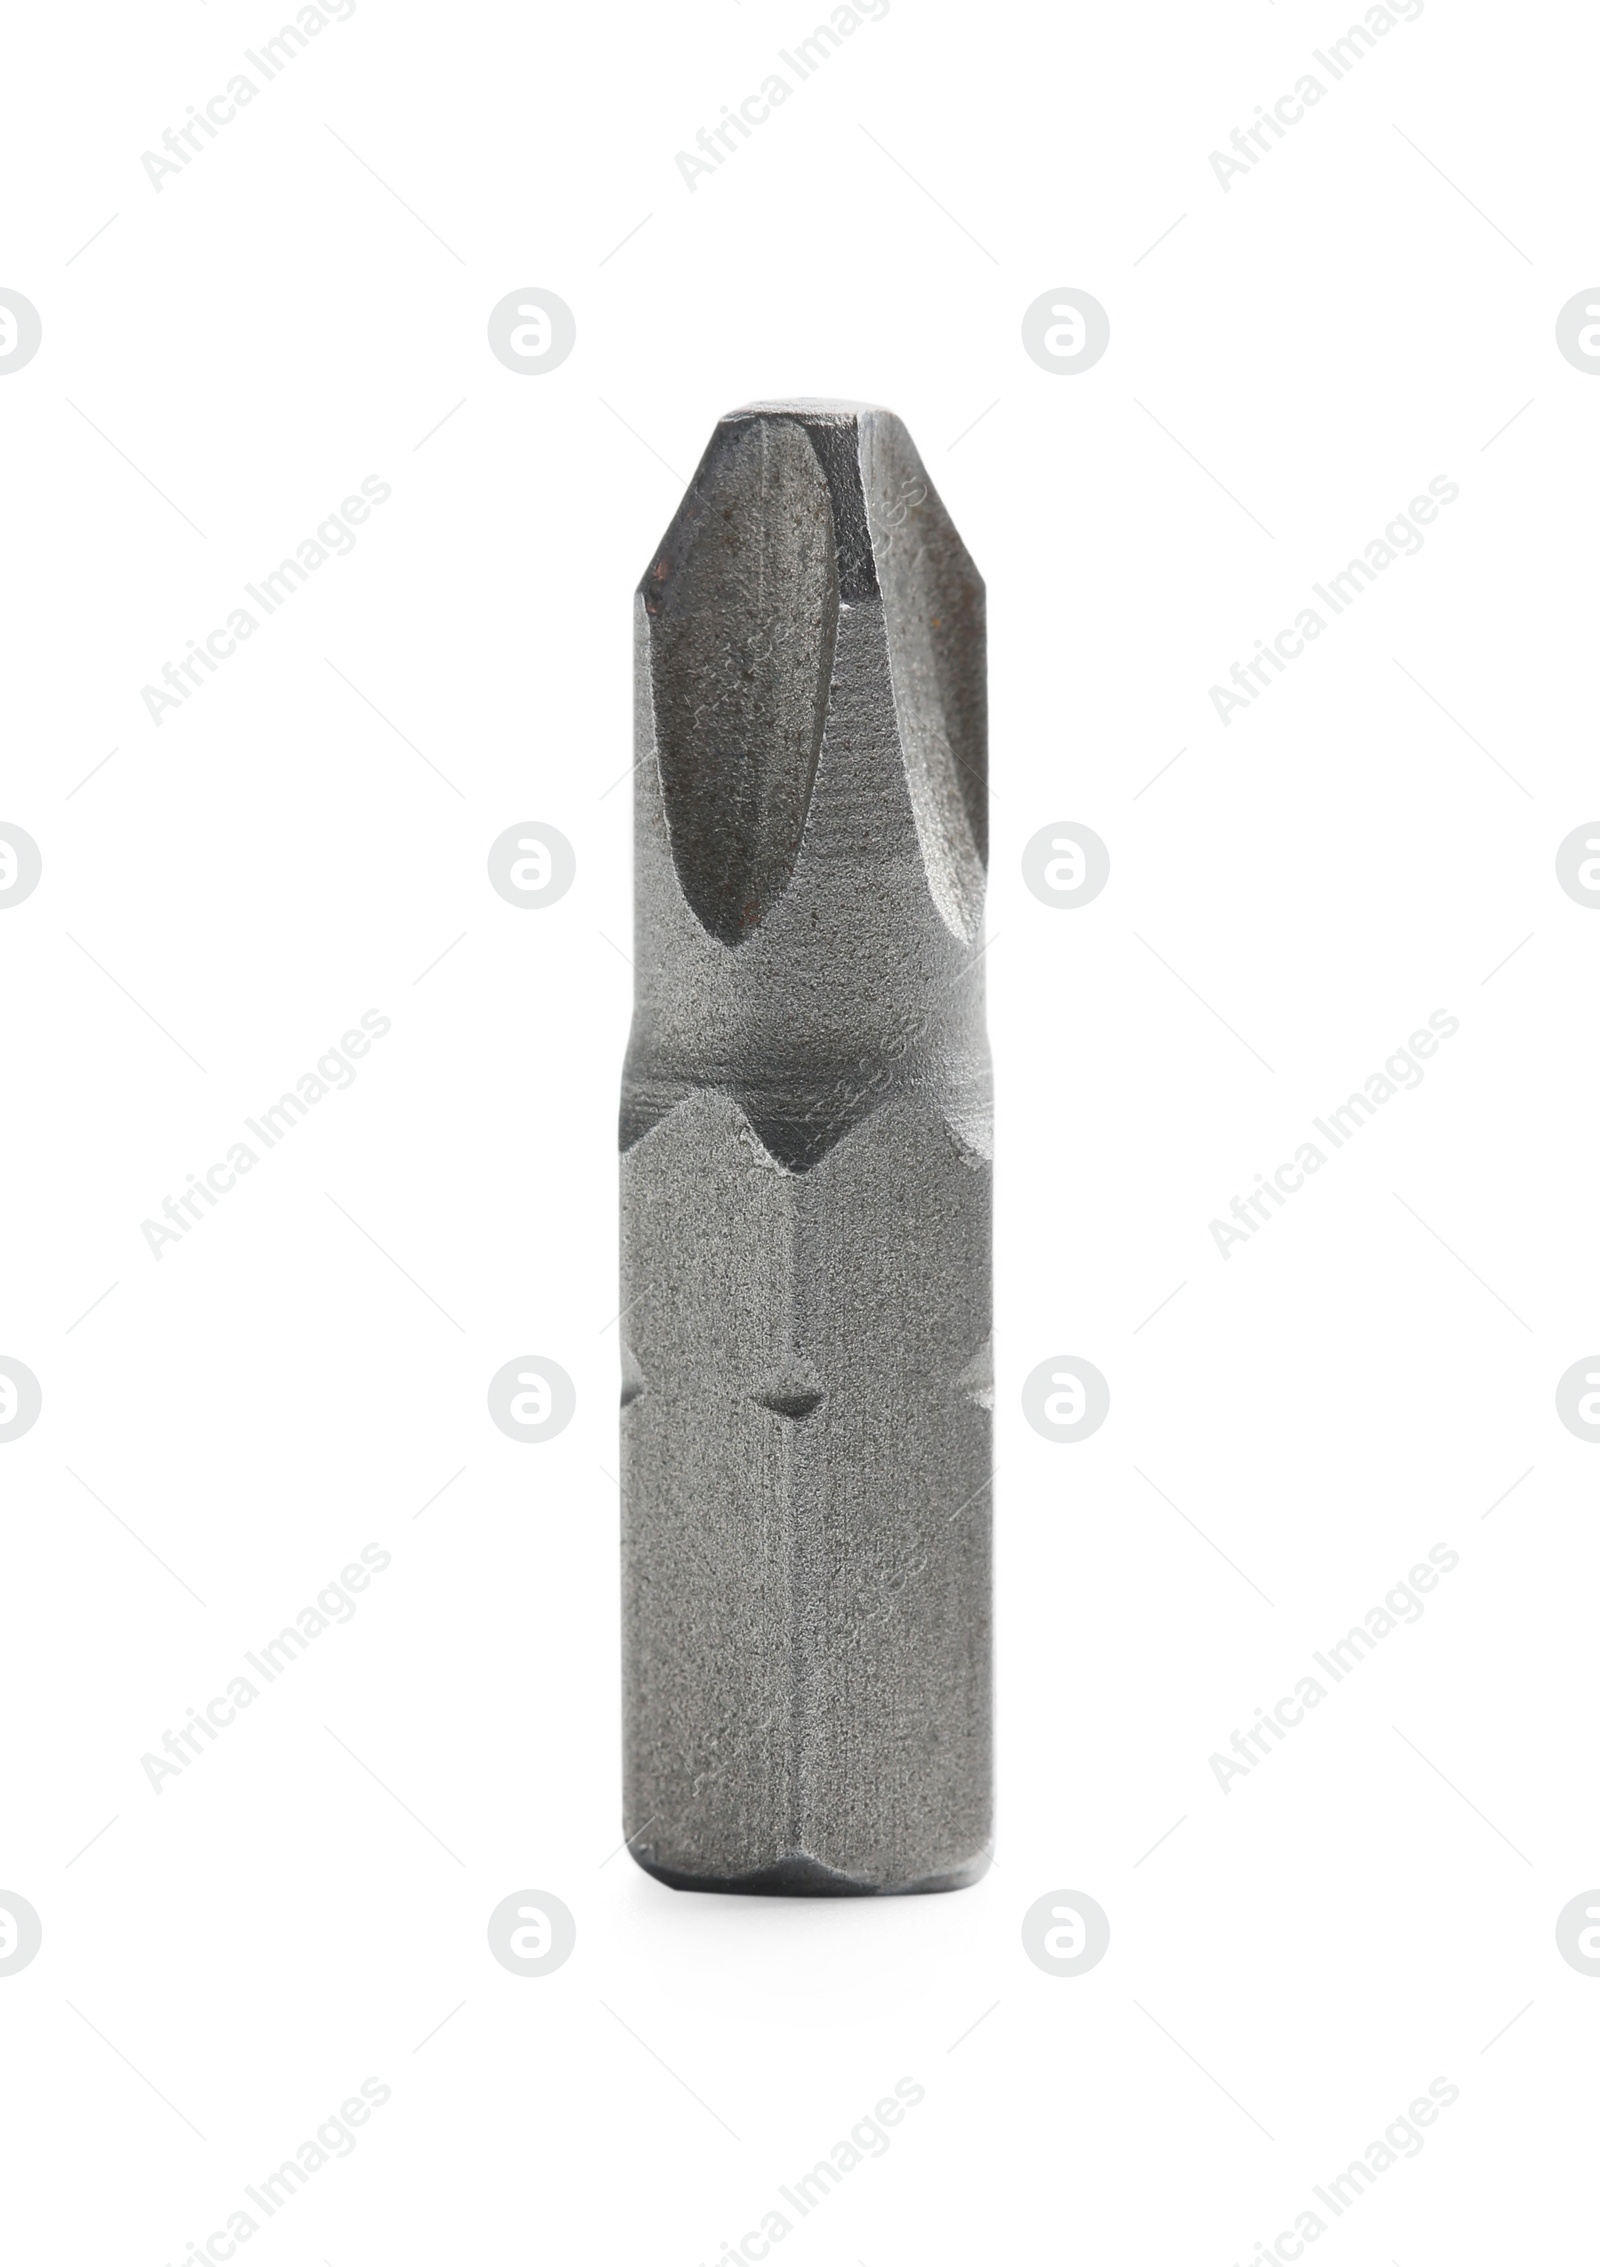 Photo of One metal screwdriver bit on white background